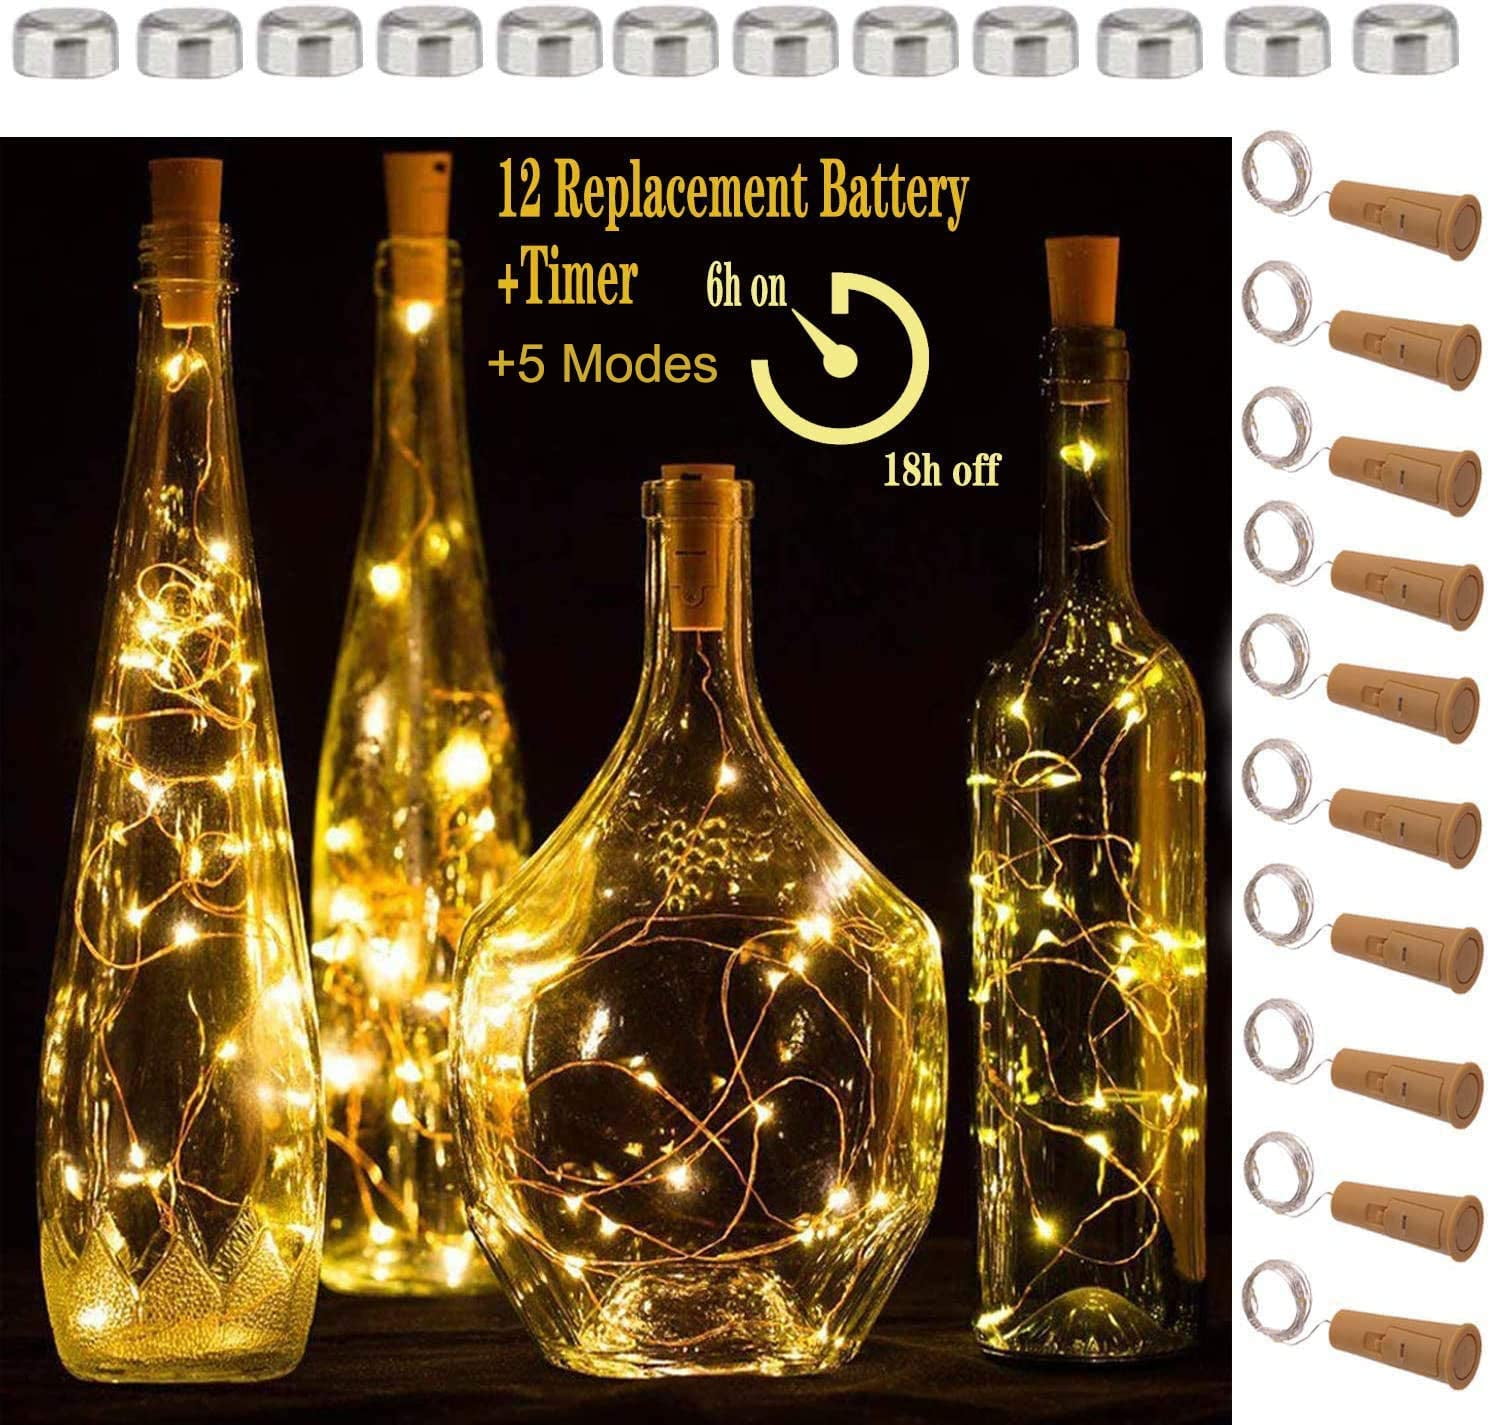 Christmas WSgift Wine Bottle Lights with Cork,10 Pack Battery Operated 15 LED Cork Shape Silver Copper Wire Fairy Mini String Lights for DIY Party Halloween,Wedding 4 Colors Steady Decor 